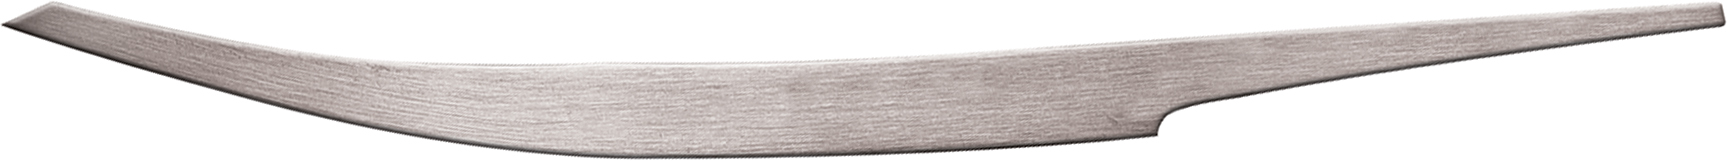 GRS lining graver No. 24-10, curved shape 